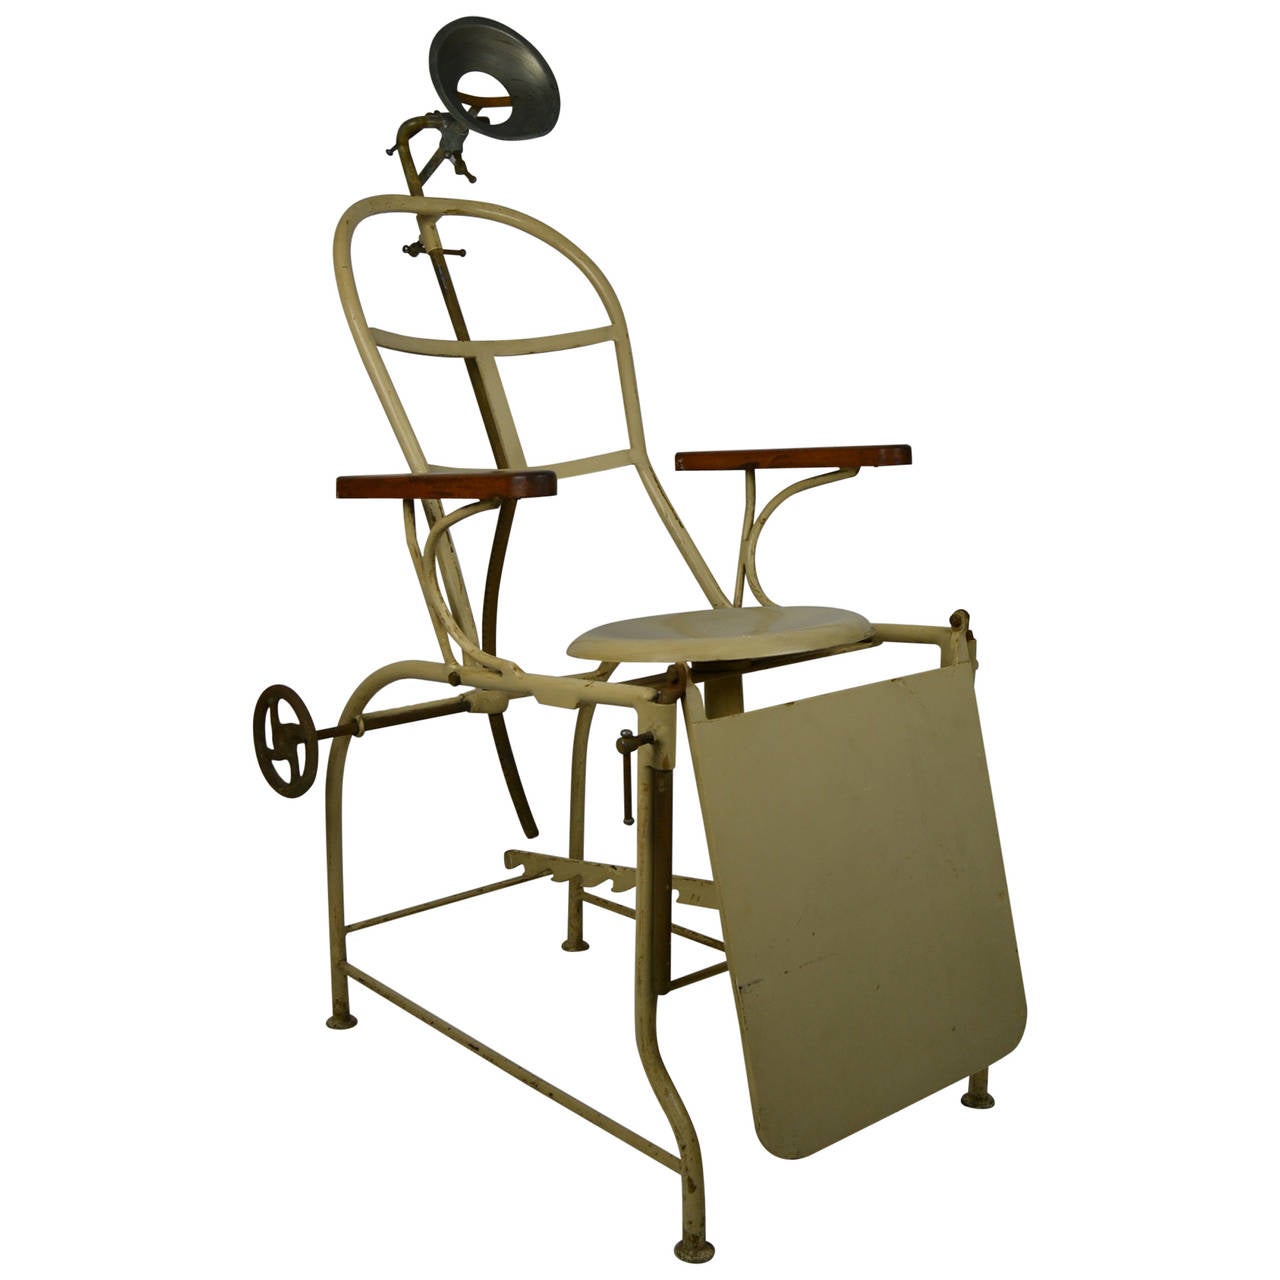 Physician's surgical chair, 1890 - Dittrick Medical History Center